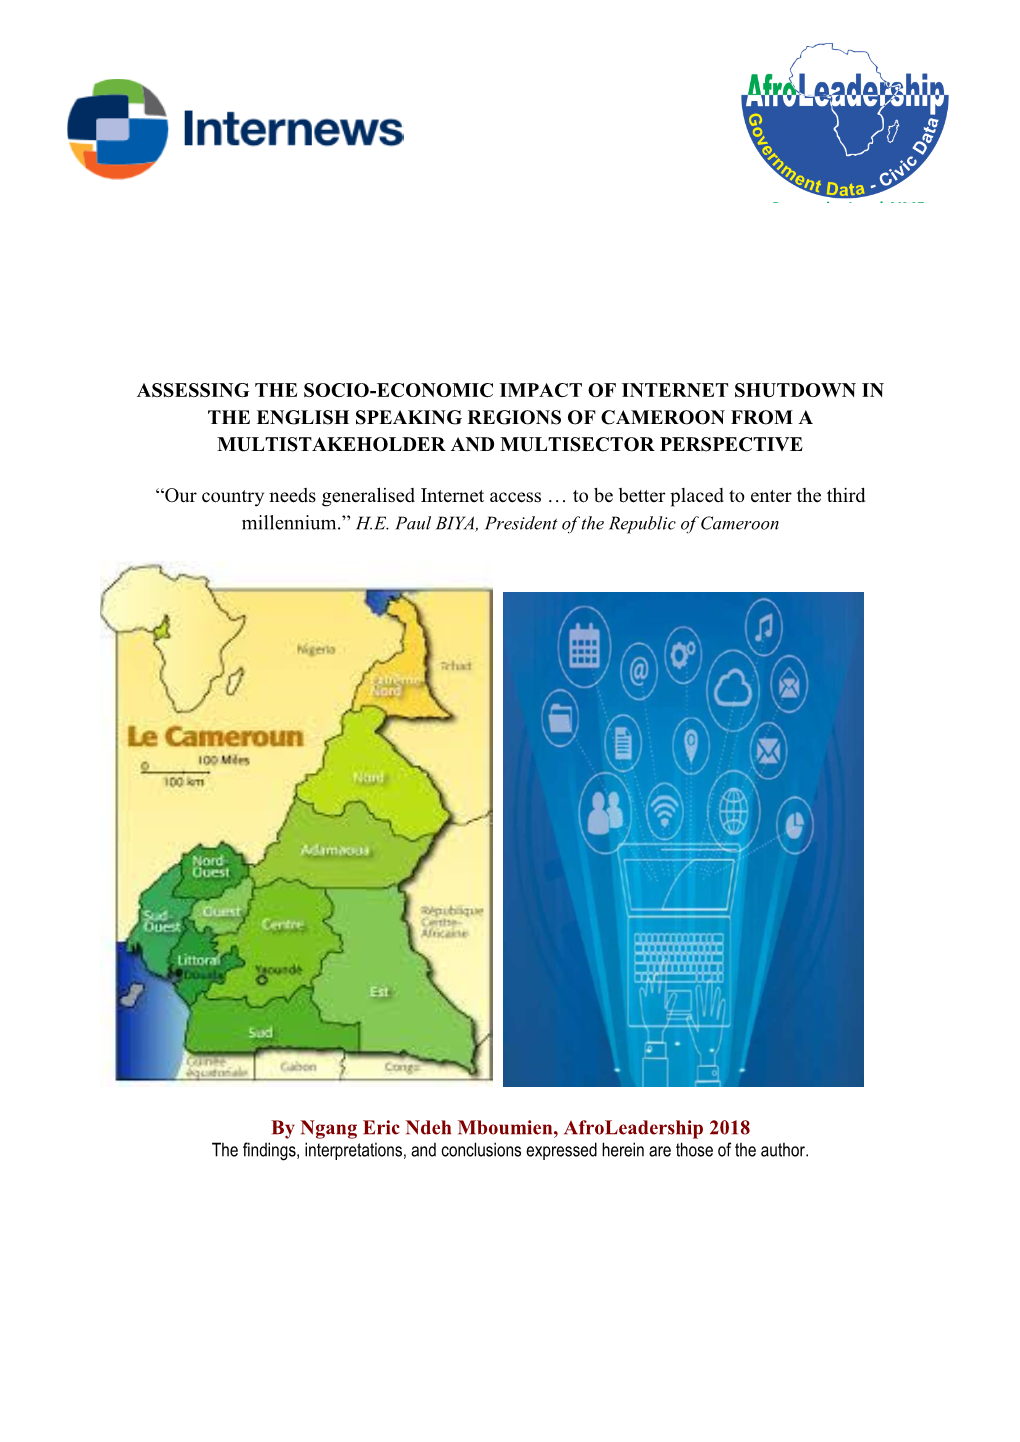 Assessing the Socio-Economic Impact of Internet Shutdown in the English Speaking Regions of Cameroon from a Multistakeholder and Multisector Perspective